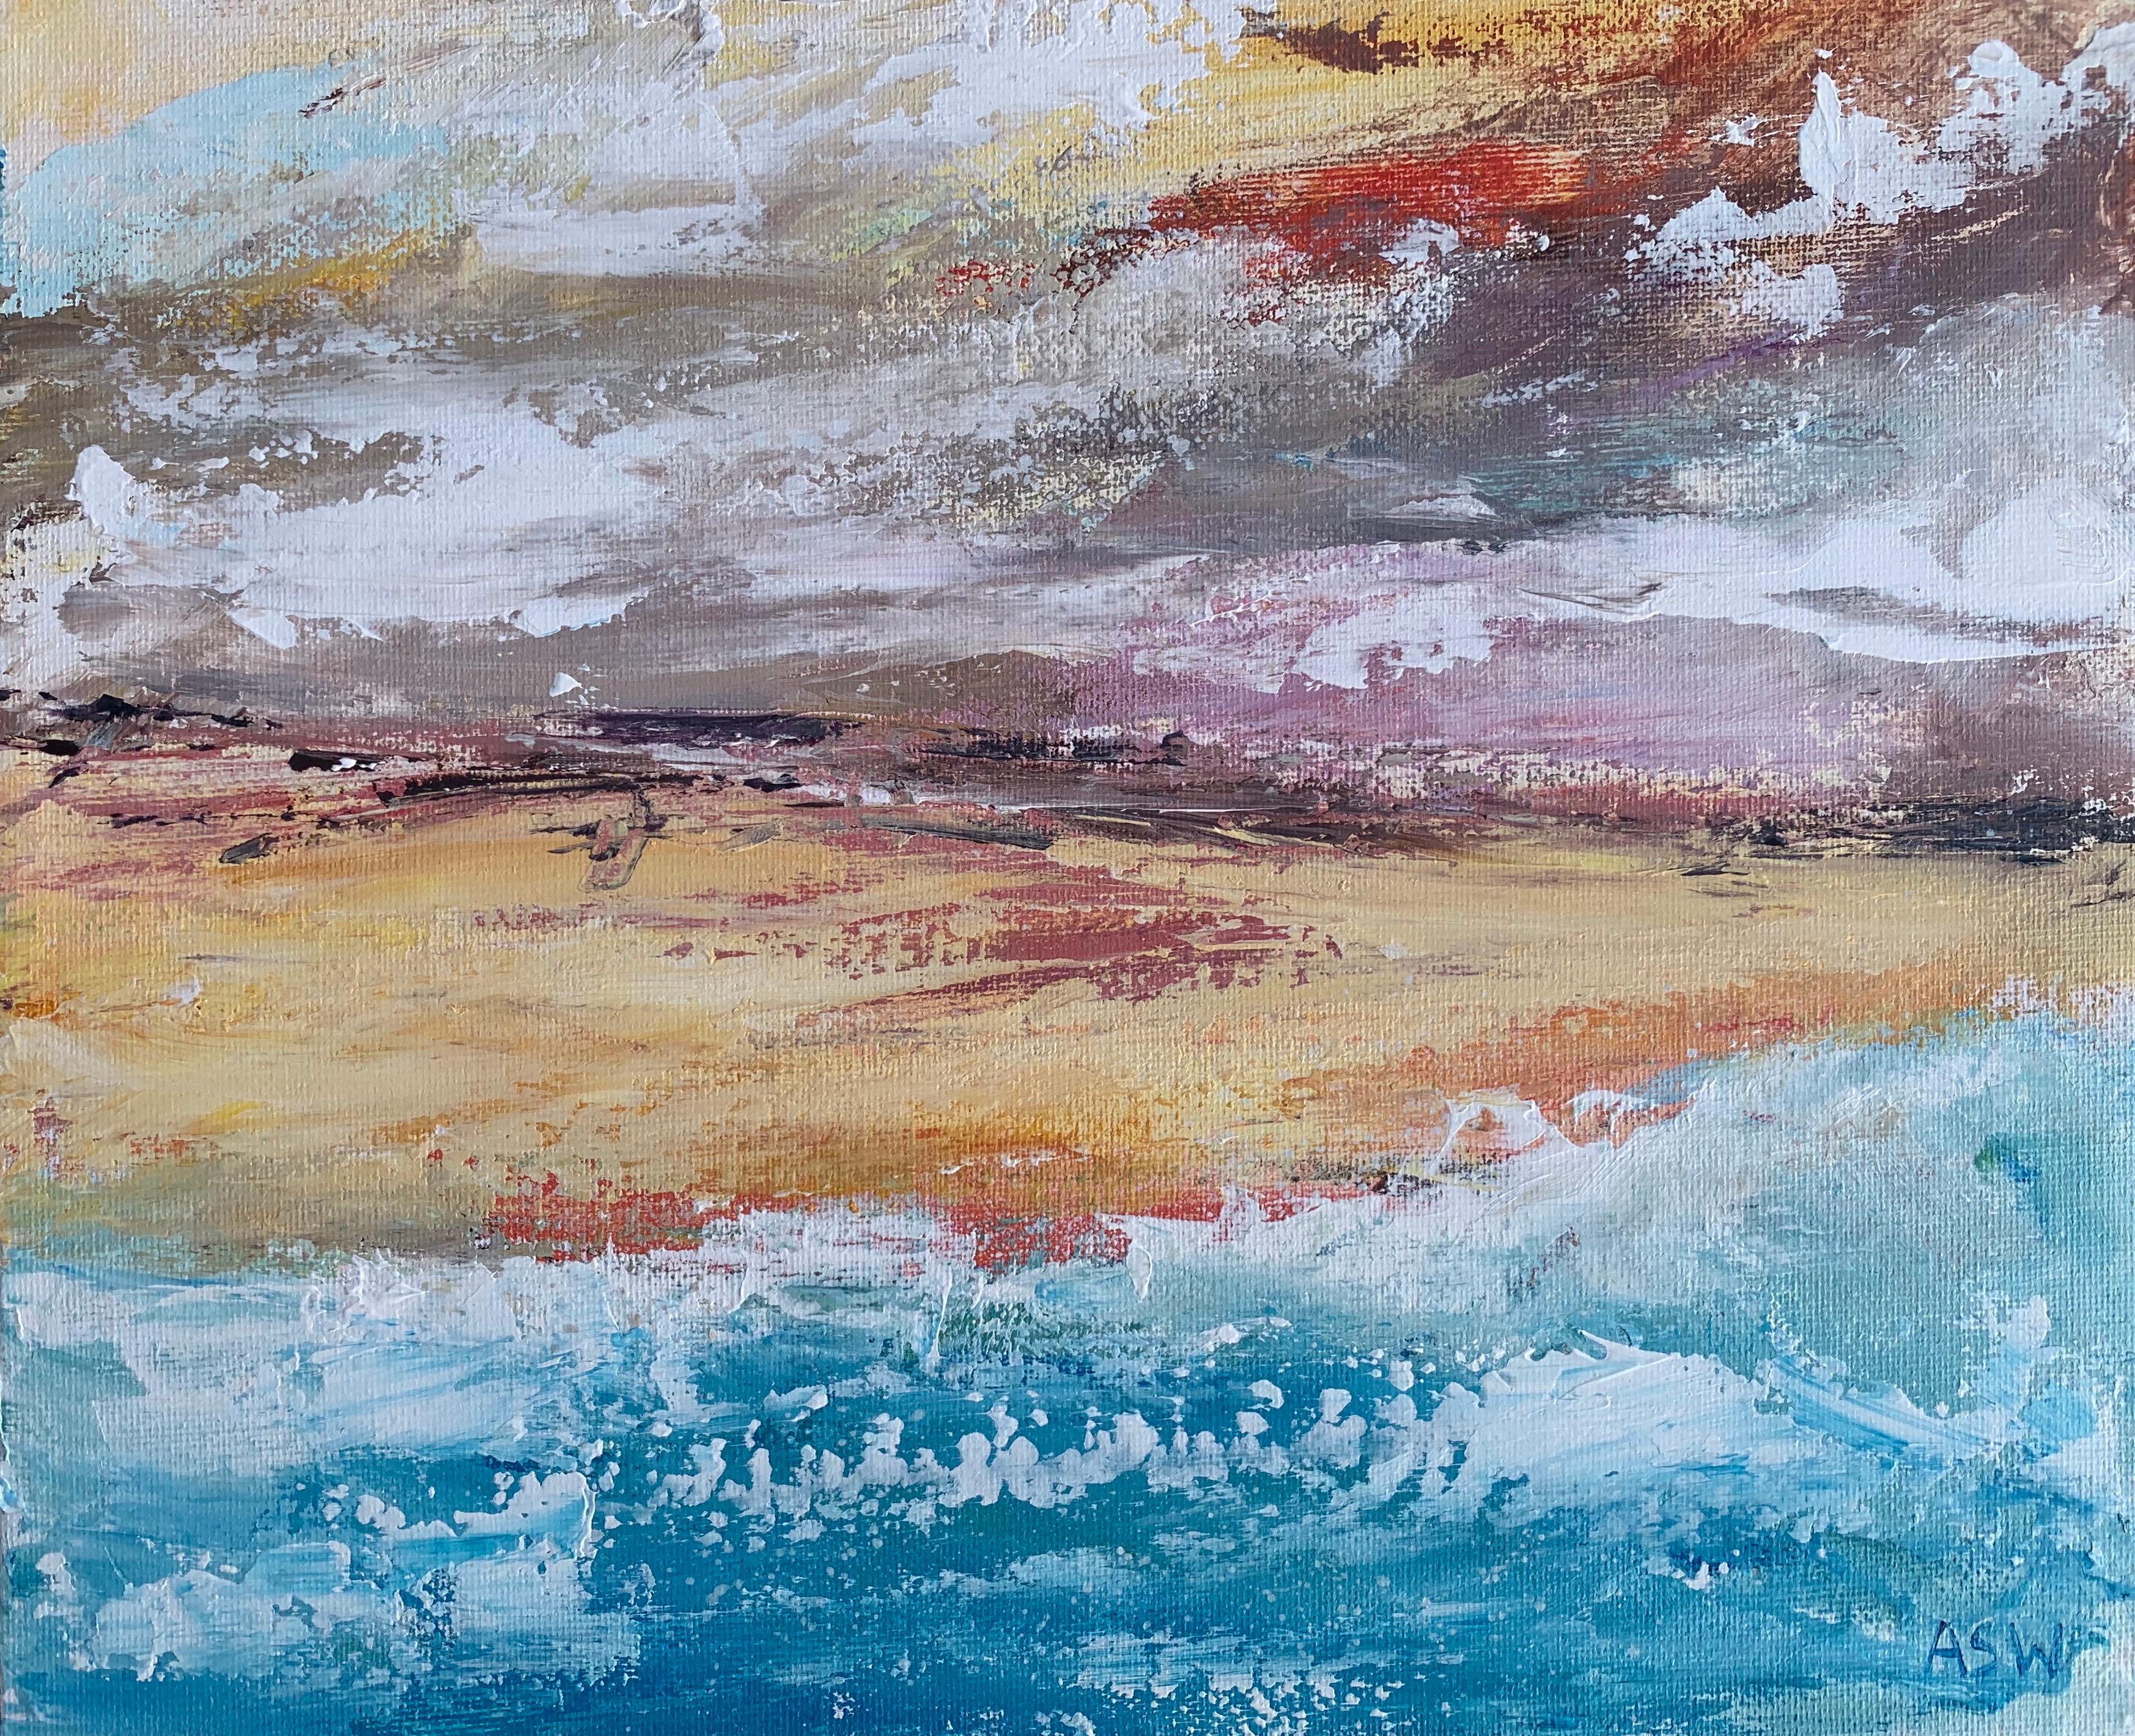 Abstract Landscape Coastal Seascape Painting by Contemporary British Artist 4